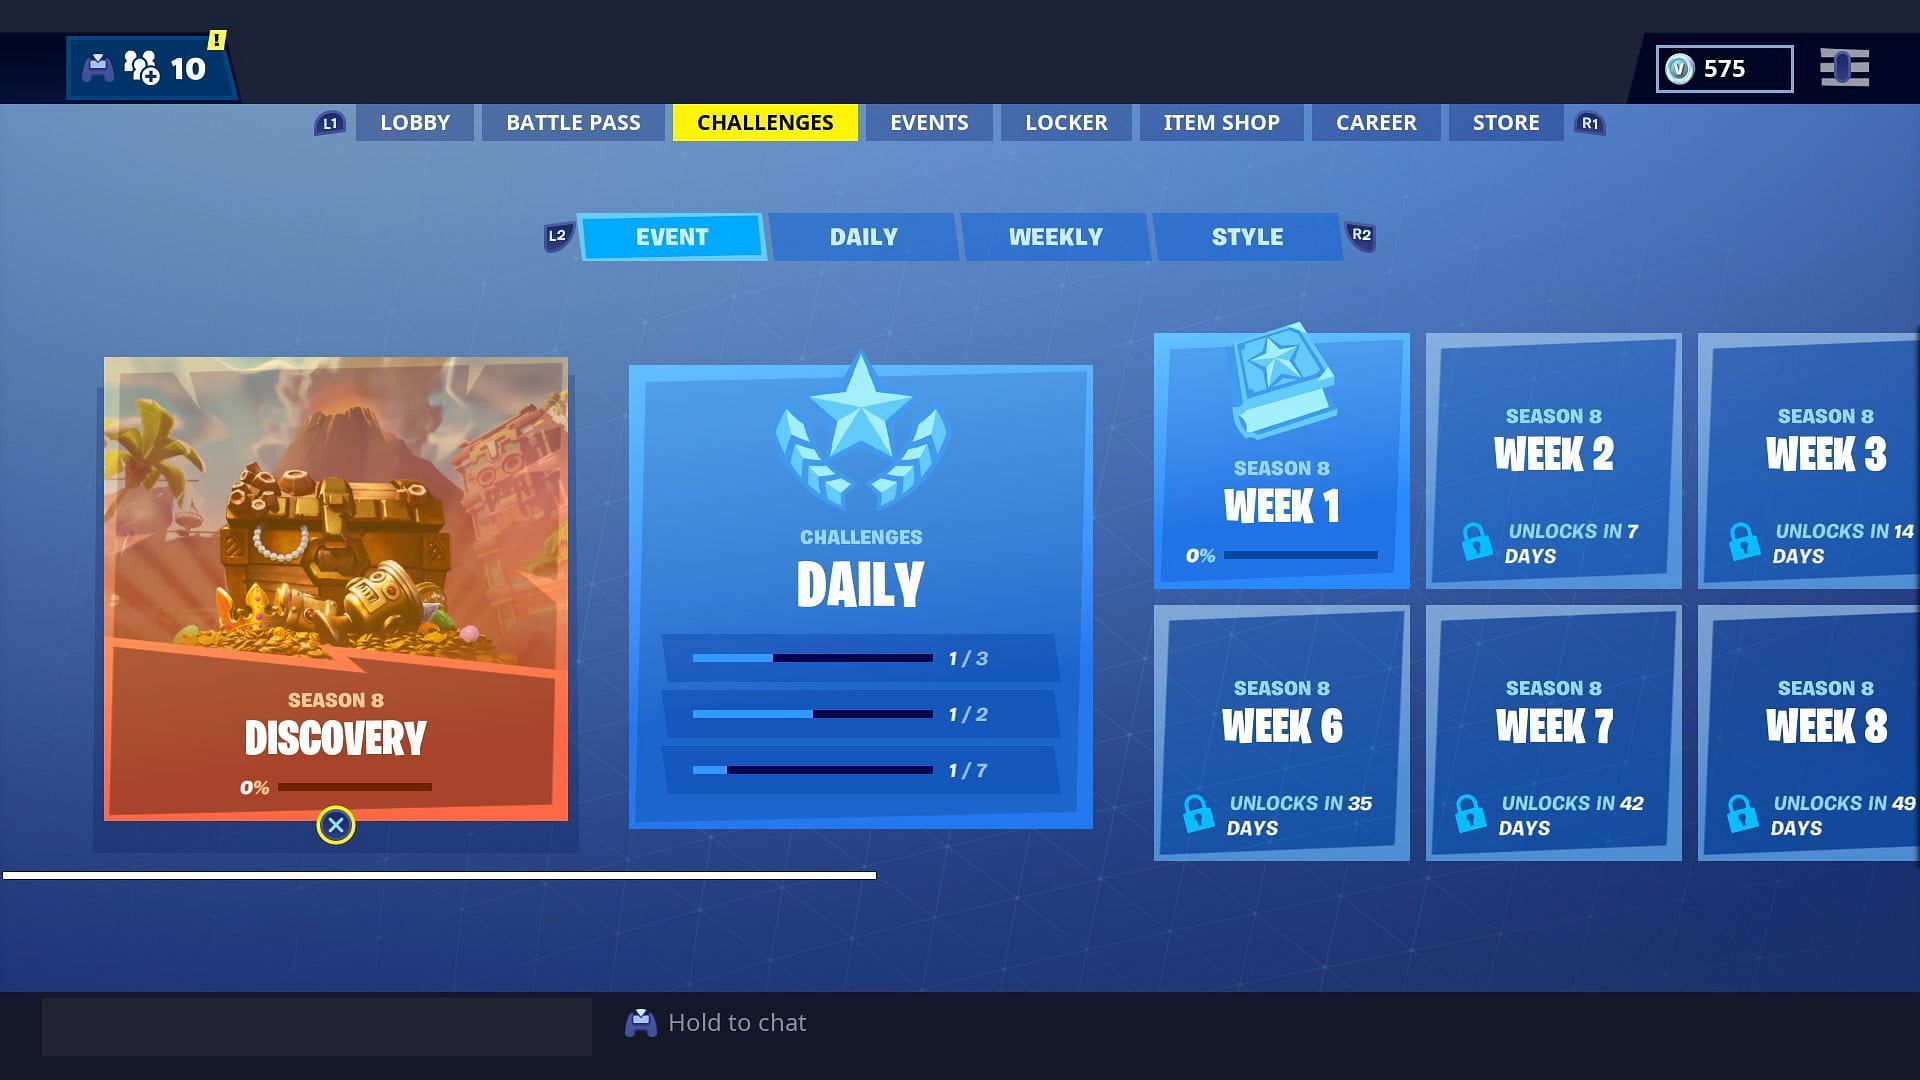 Fortnite&#039;s new UI causes problems for players by having too many options and subscreens to navigate (Image via Epic Games)